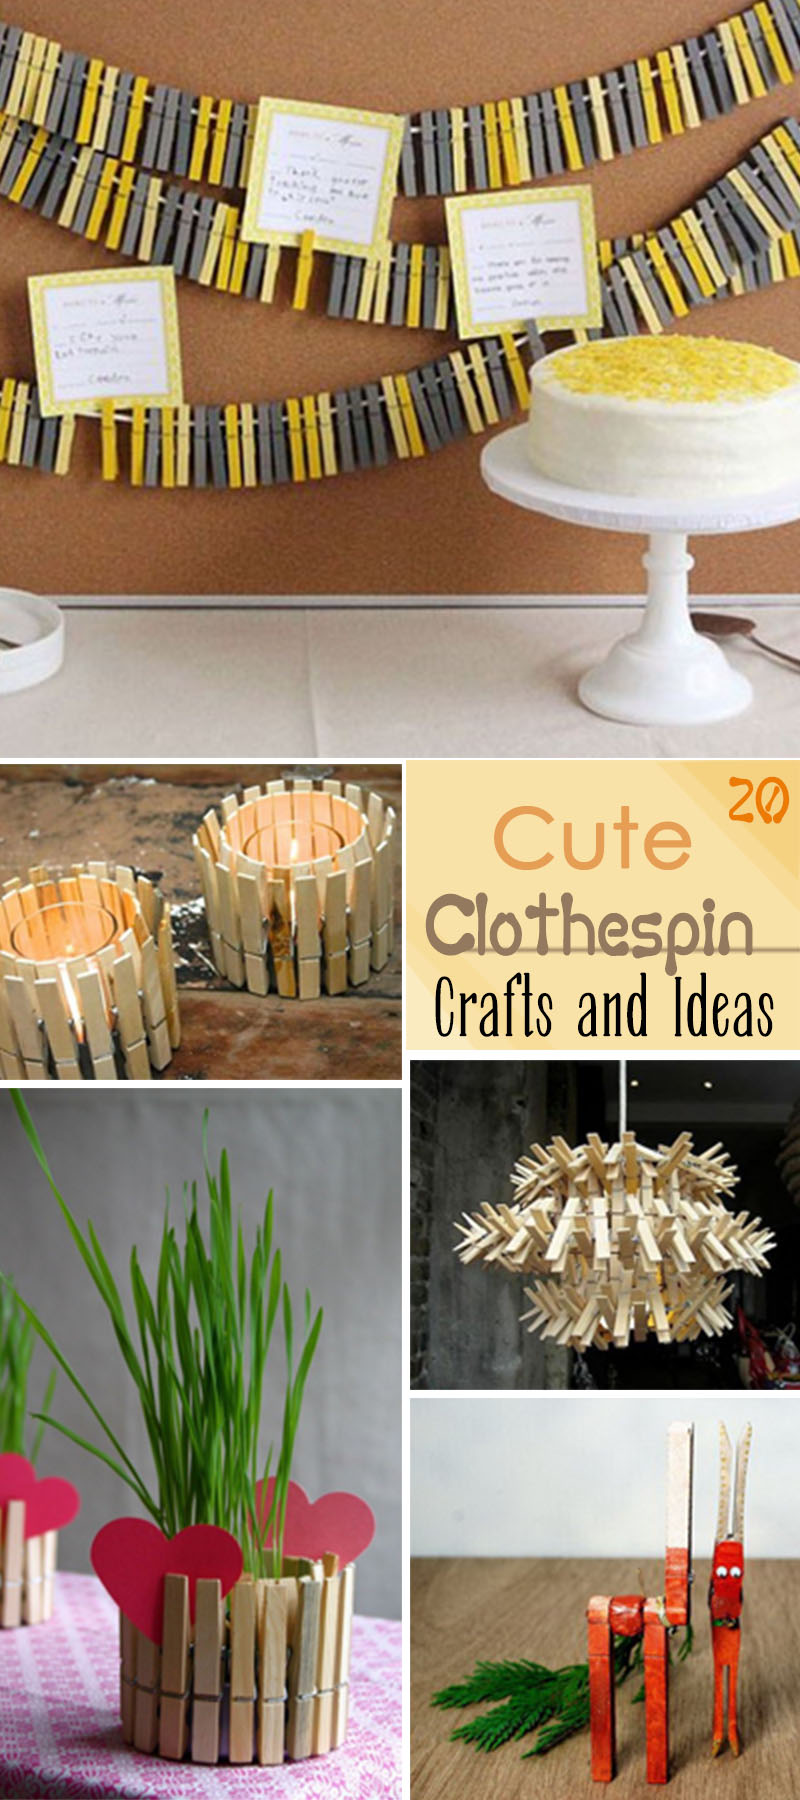 Cute Clothespin Crafts and Ideas!